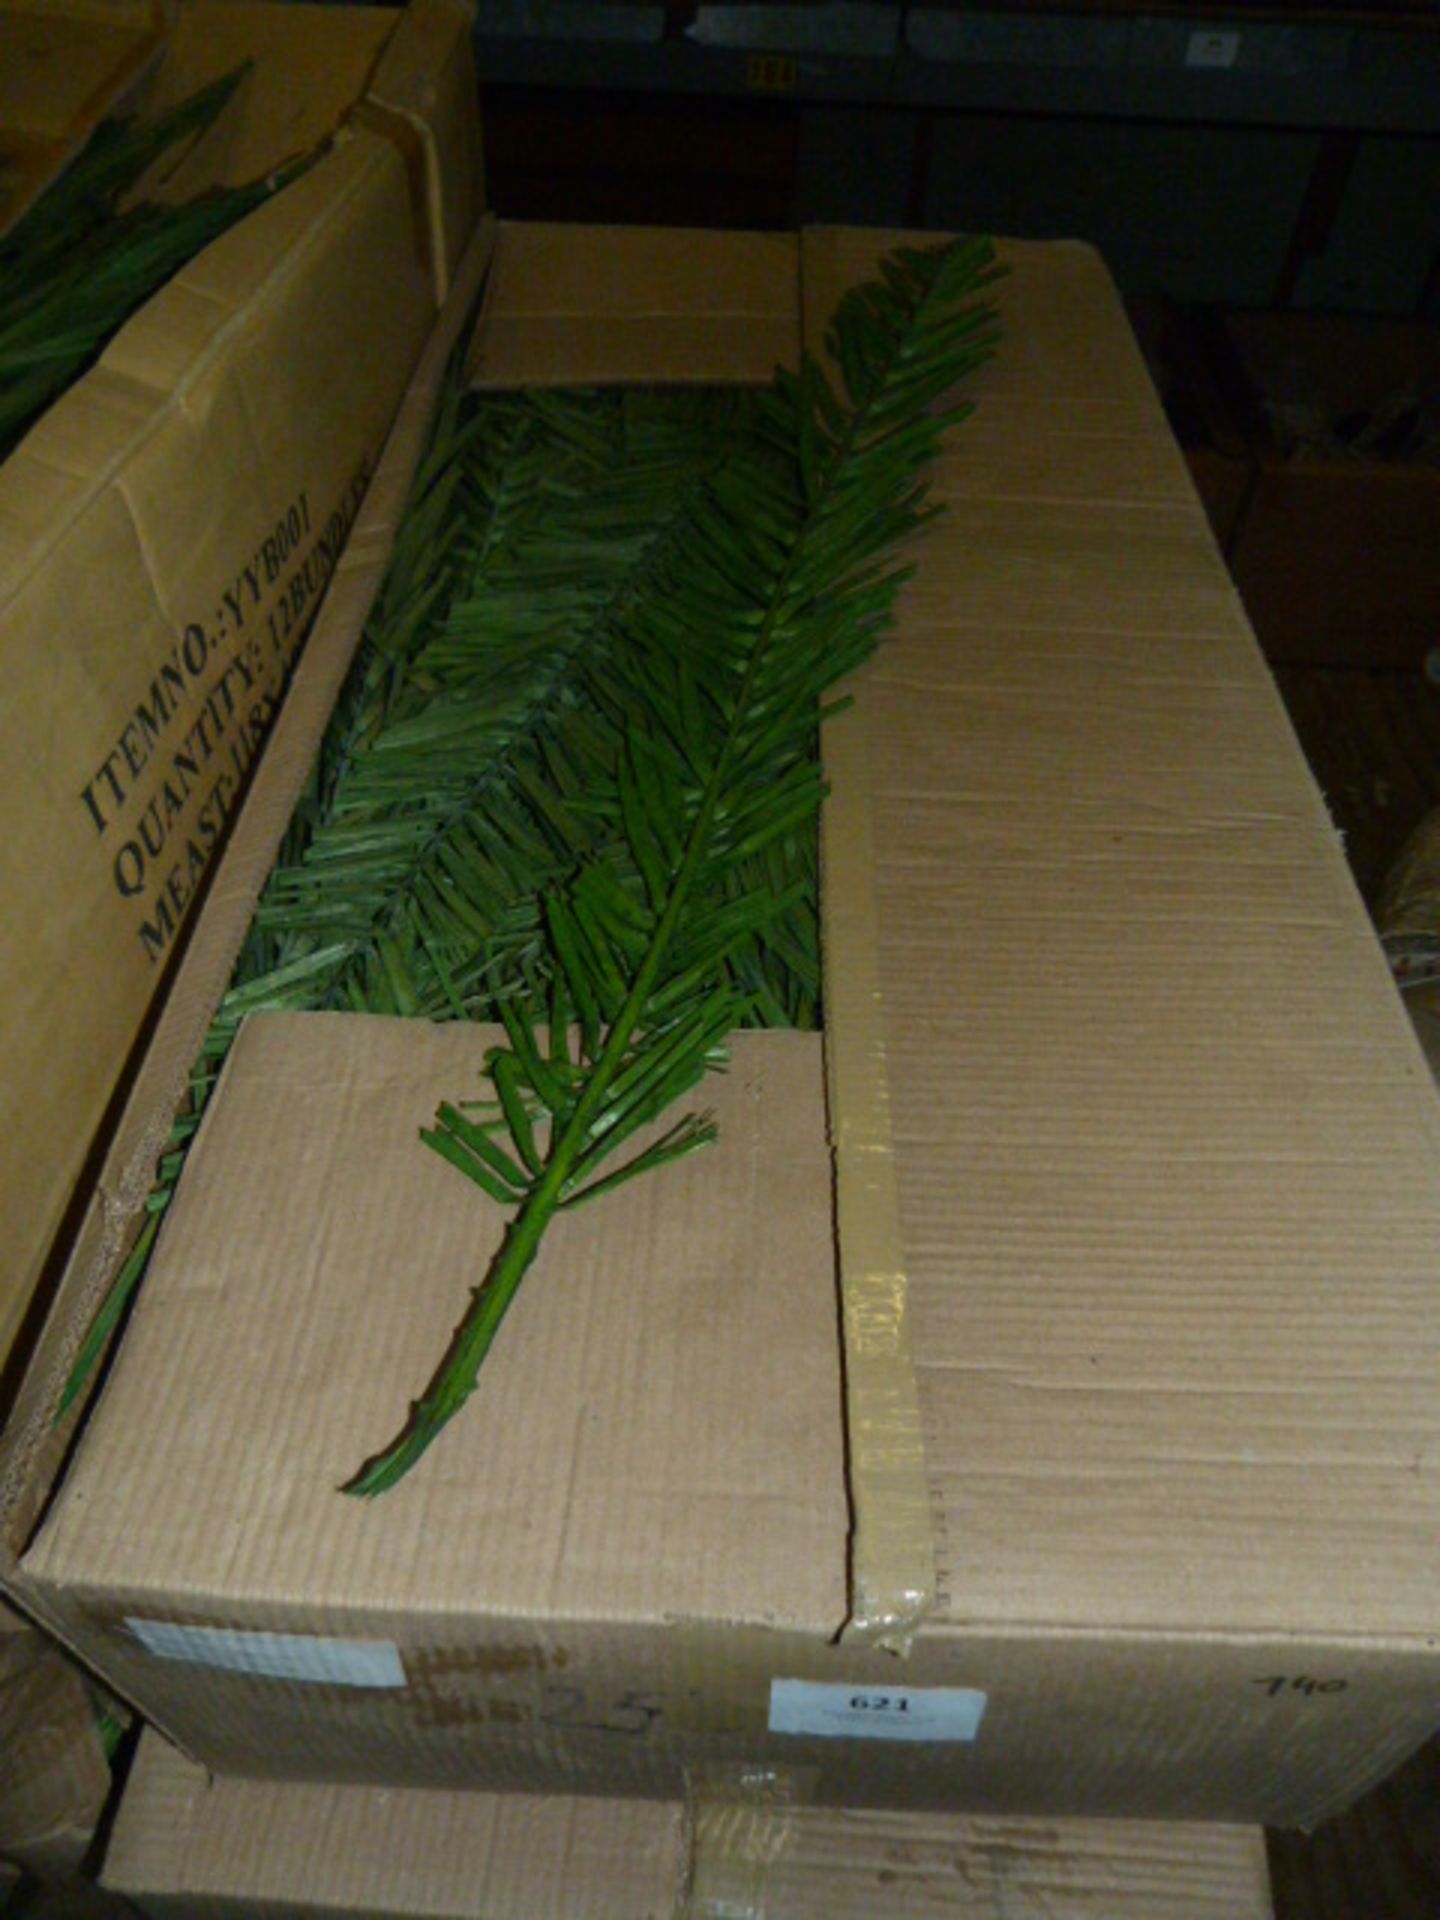 *Box Containing Approximately 250 Cannas Pale Green Artificial Foliage Stems